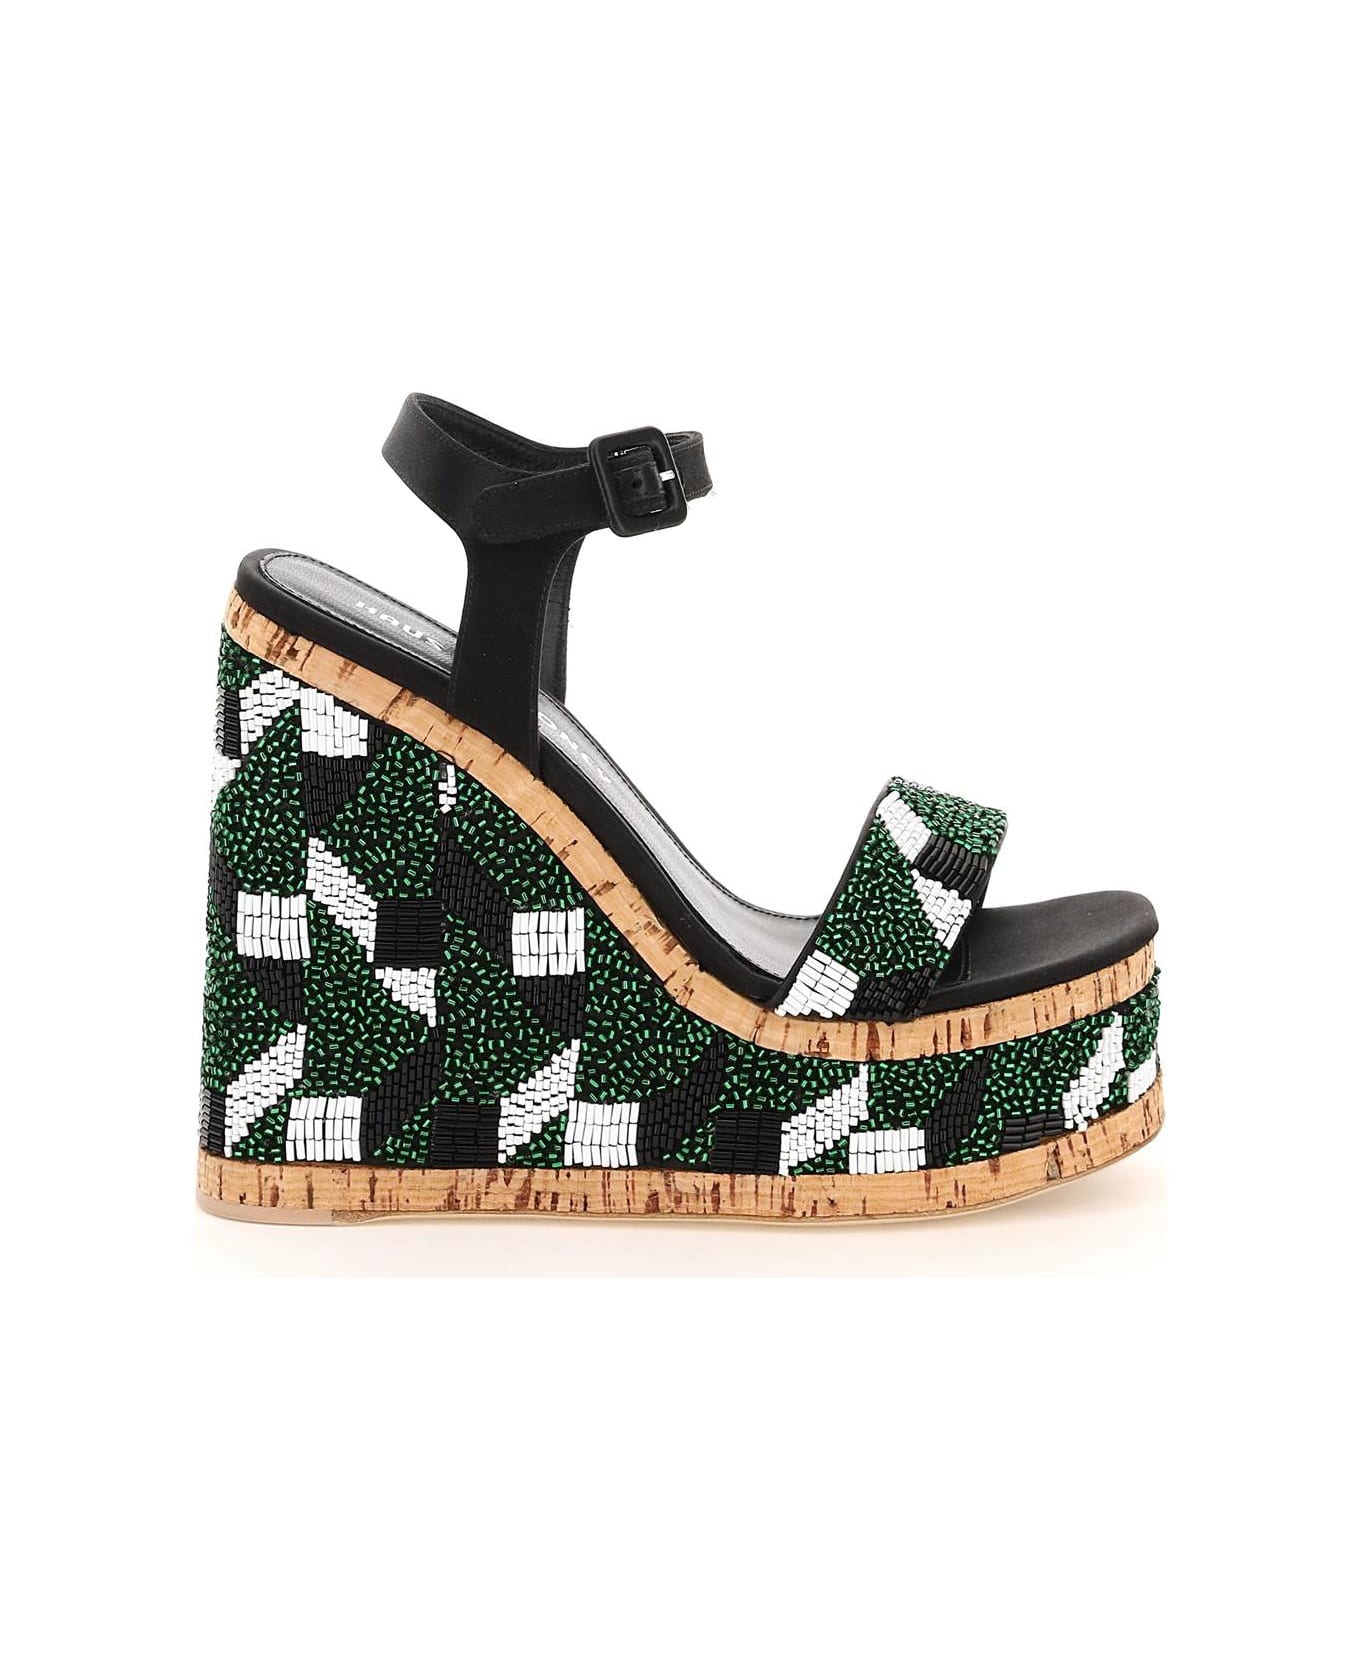 Womens Shoes Heels Wedge sandals HAUS OF HONEY Leather Black And Green Lust Bead Weimar Wedge Sandals 